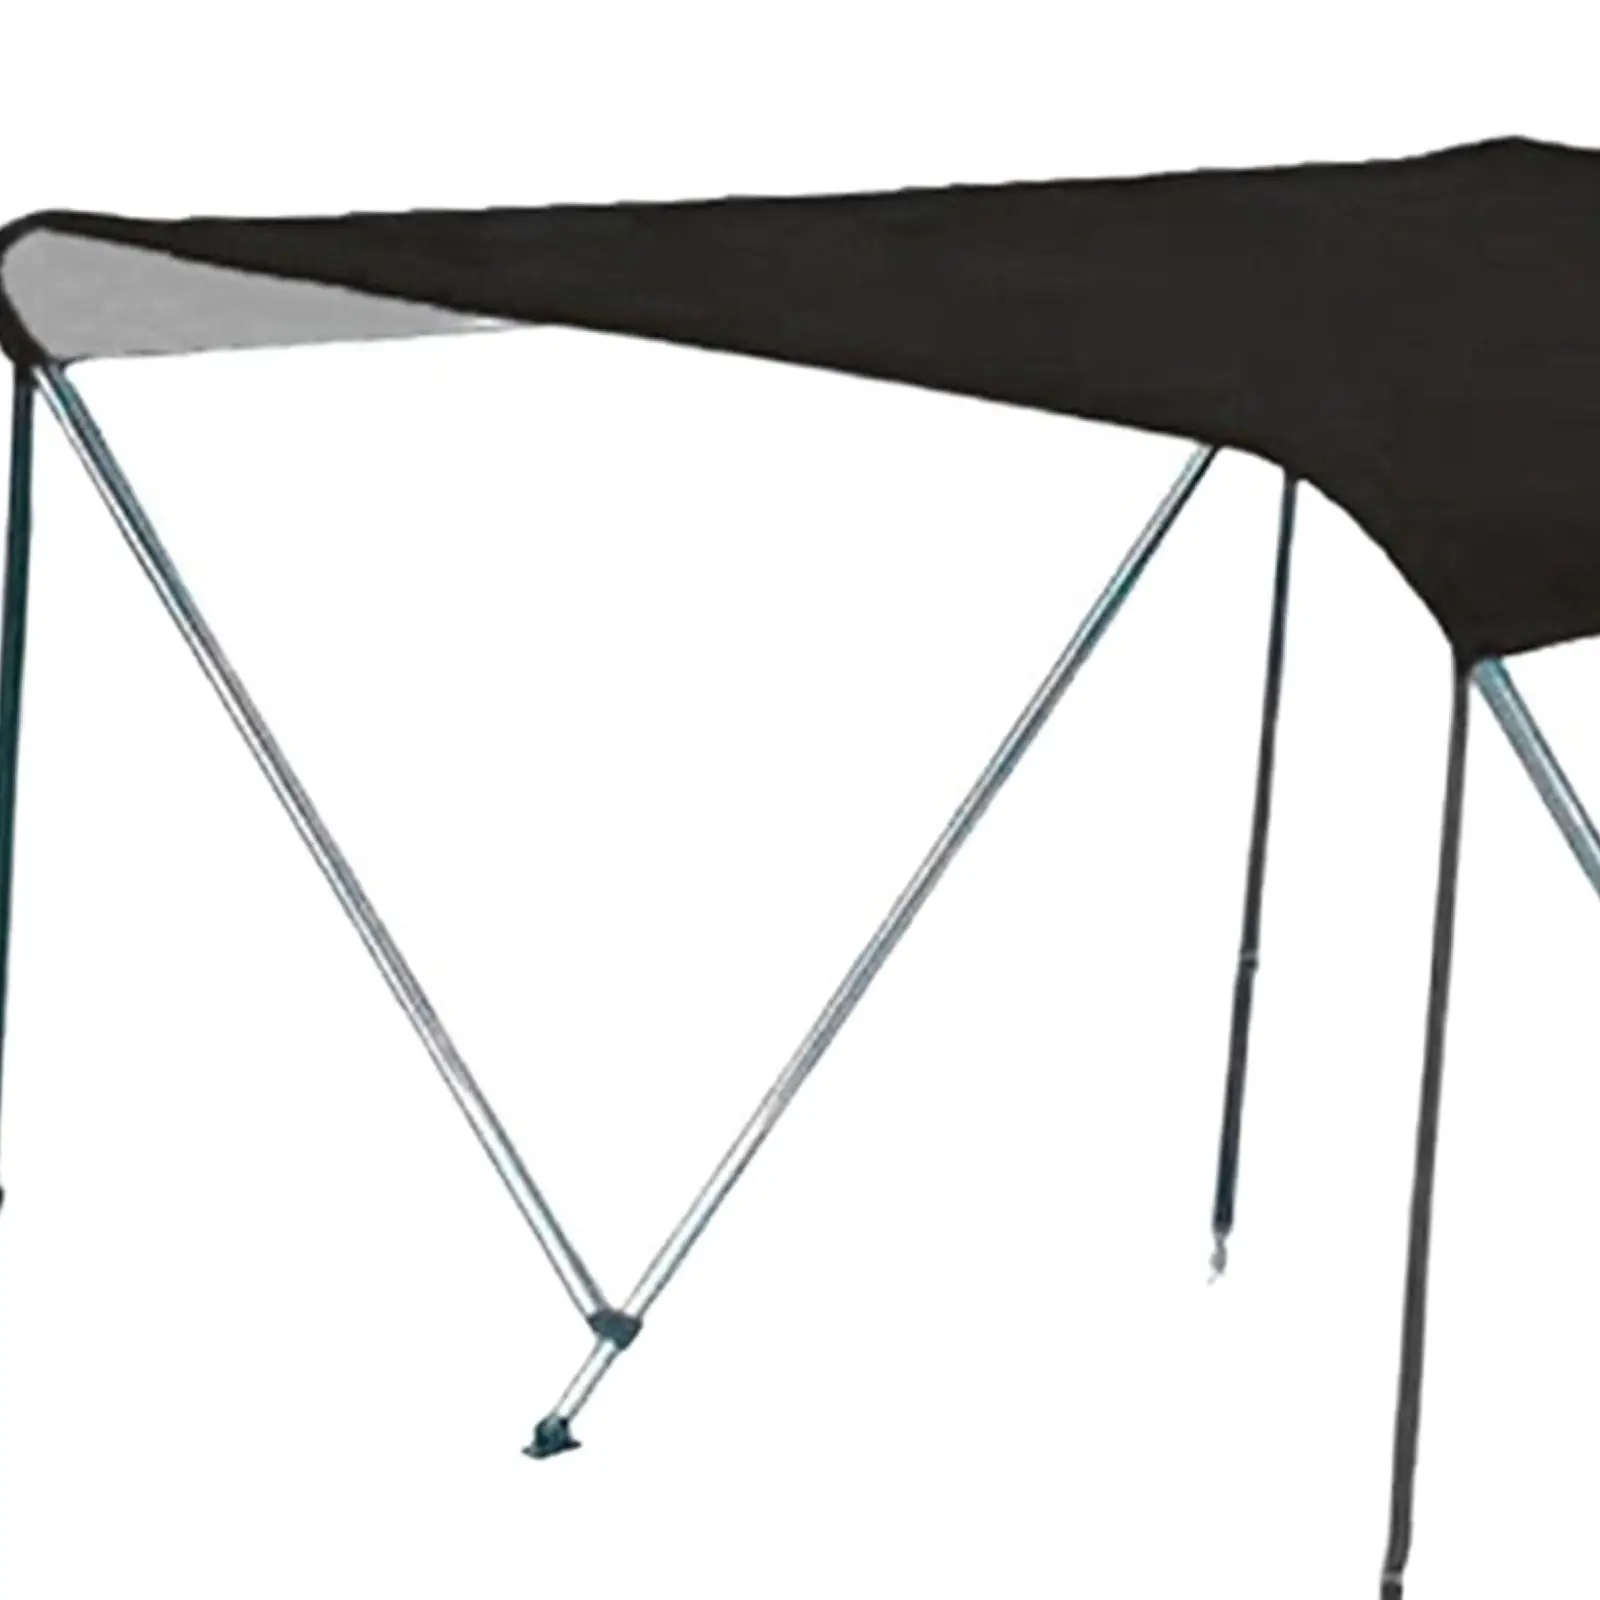 Bimini Top for Boat Sun Shelter Multifunctional Boat Awning Boat Canopy for Boat Dinghy Sailboat Canoe Fishing Boat